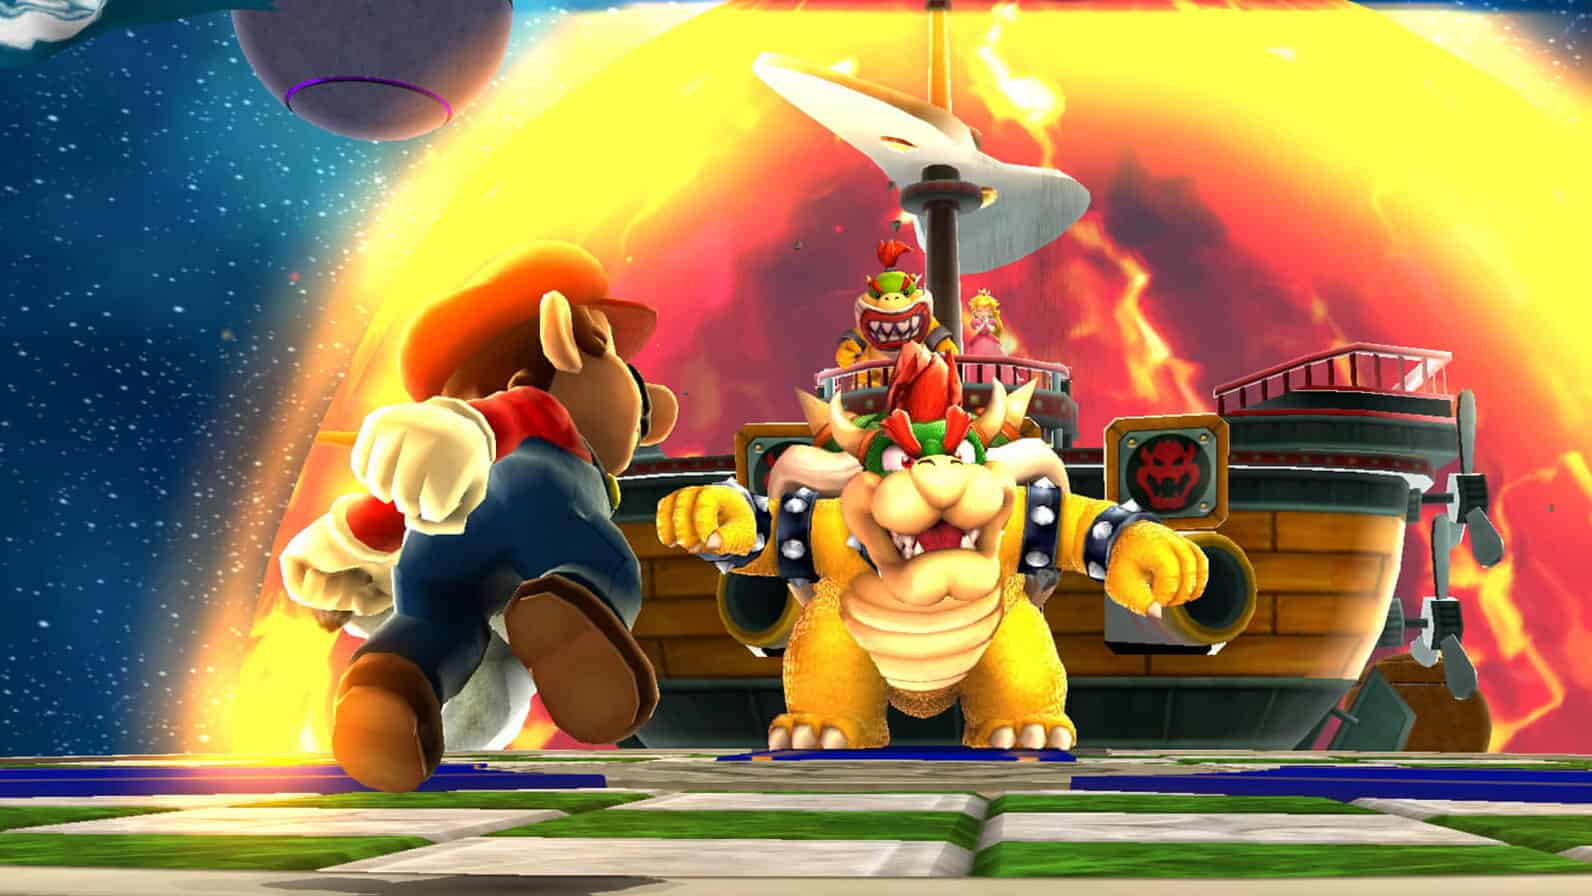 Super Mario 3D All-Stars Review - Galaxy fight with Bowser